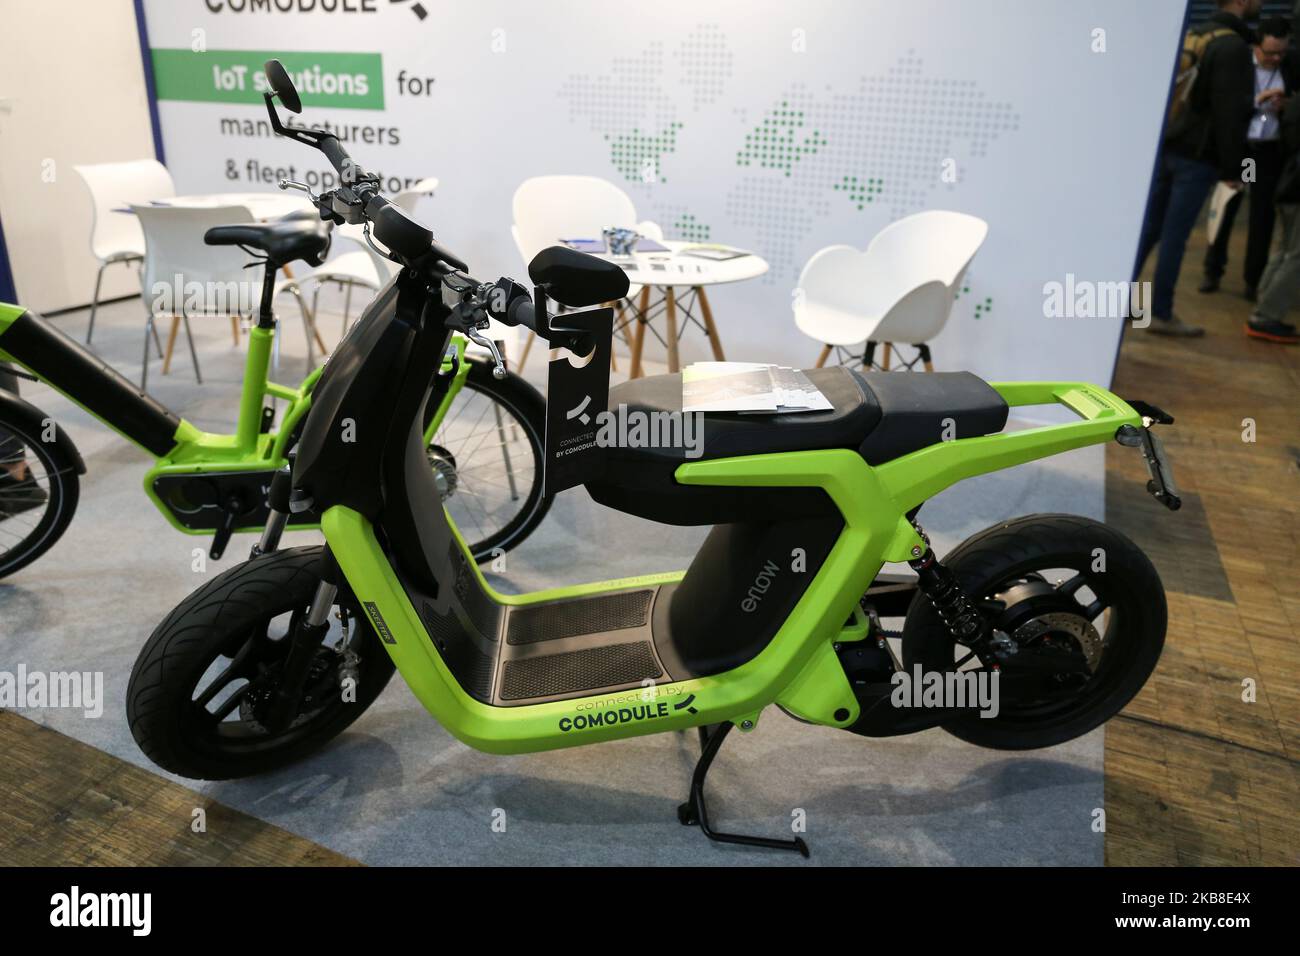 The Estonian manufacturer Comodule exhibits a connected electric scooter at the Autonomy and Urban Mobility show, in Paris on October 16, 2019. (Photo by Michel Stoupak/NurPhoto) Stock Photo